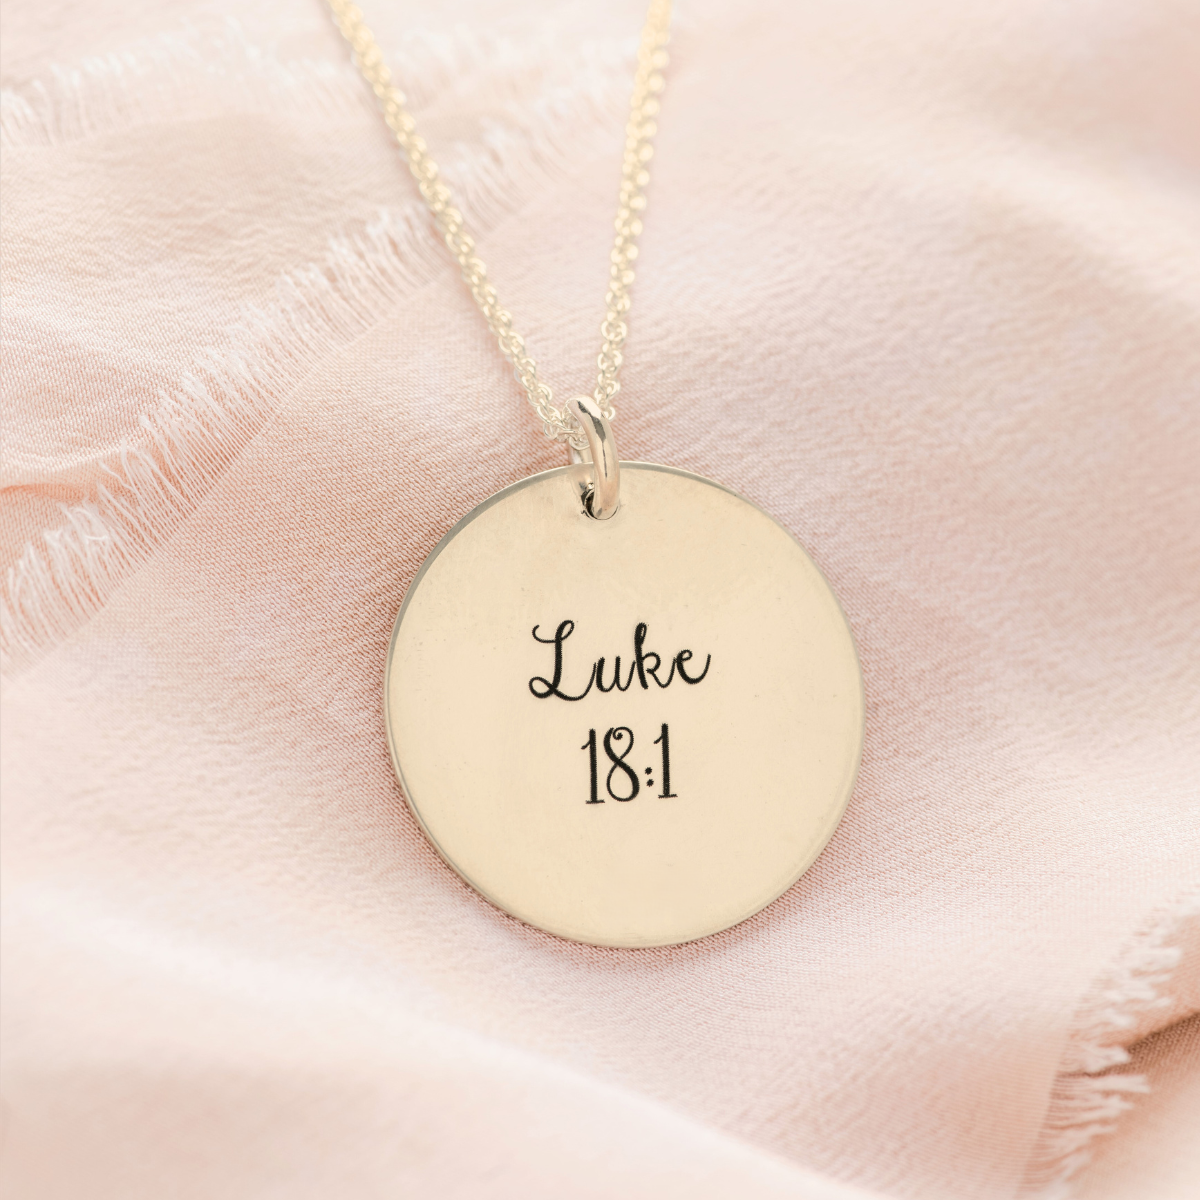 14k Gold Pray and Never Give Up Pendant Necklace | Luke 18:1